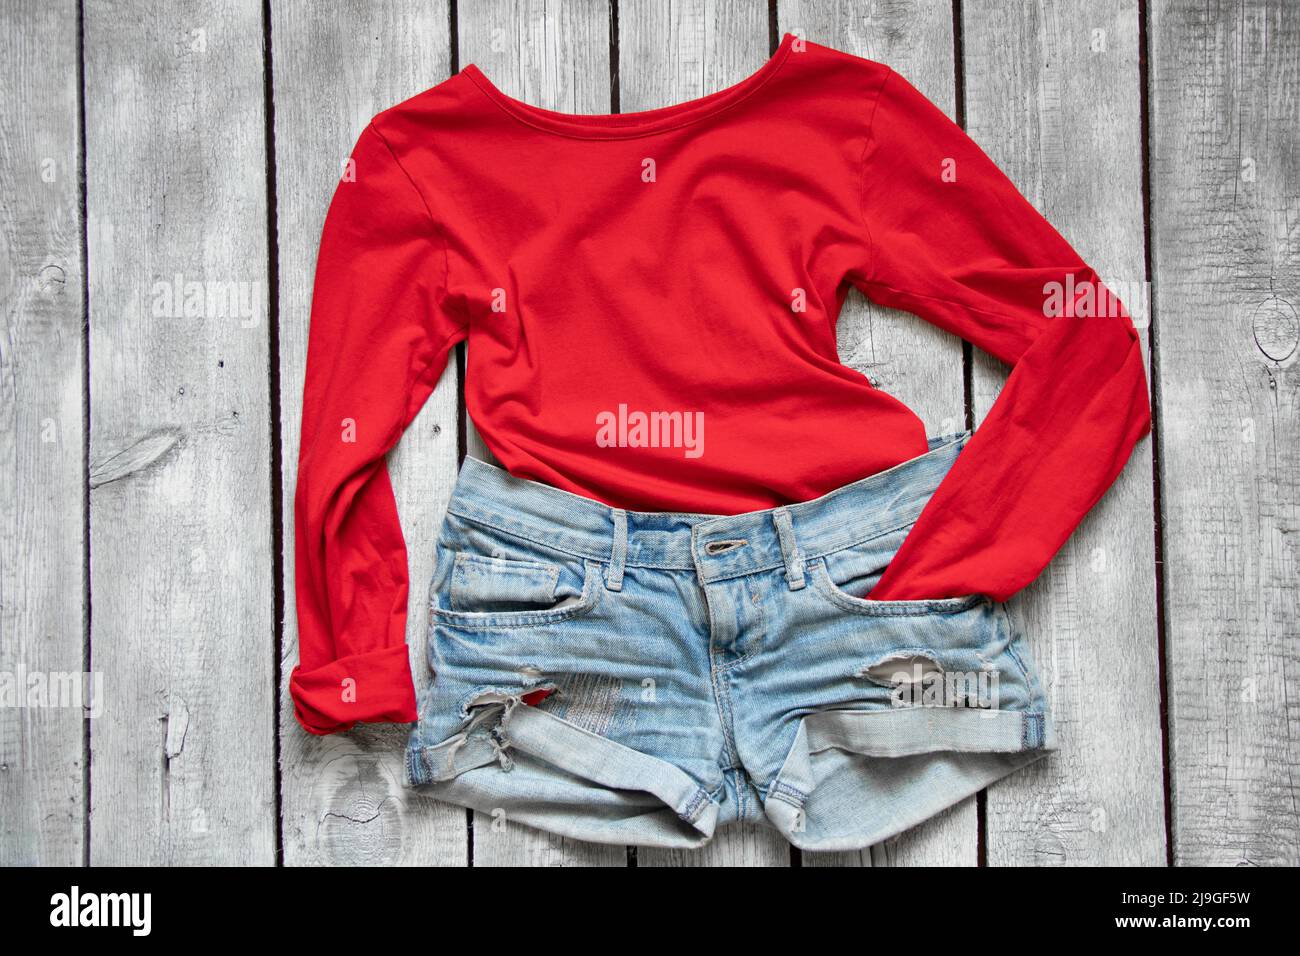 red jacket and denim shorts lie on a white wooden table, women's clothing on the table Stock Photo